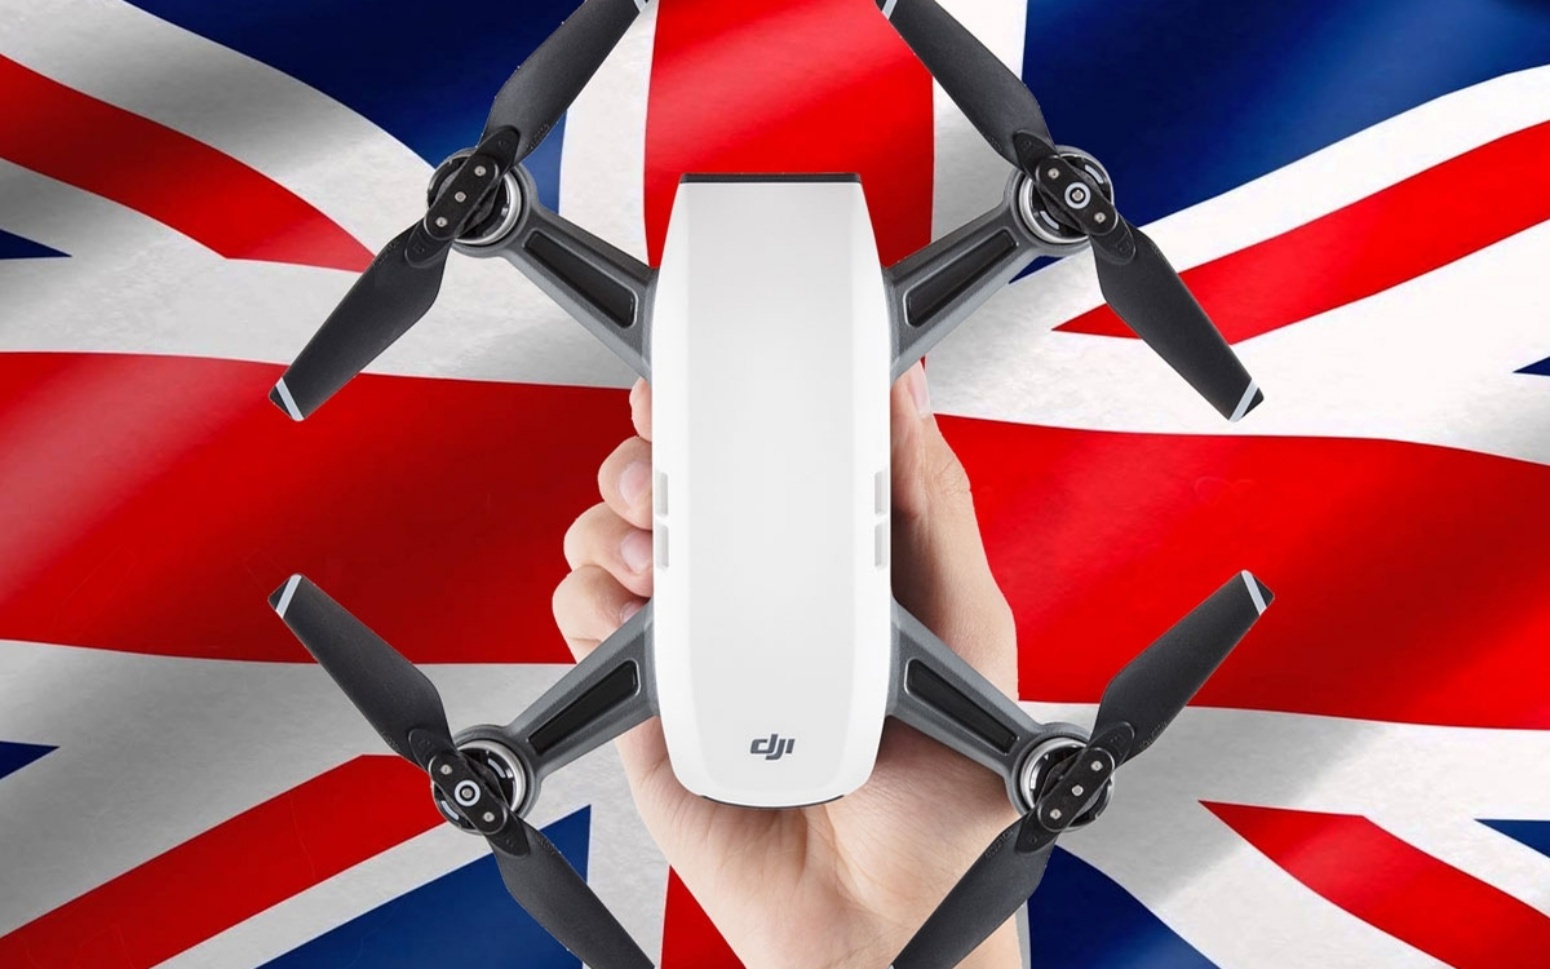 New drone and model aircraft registration and education service in the UK